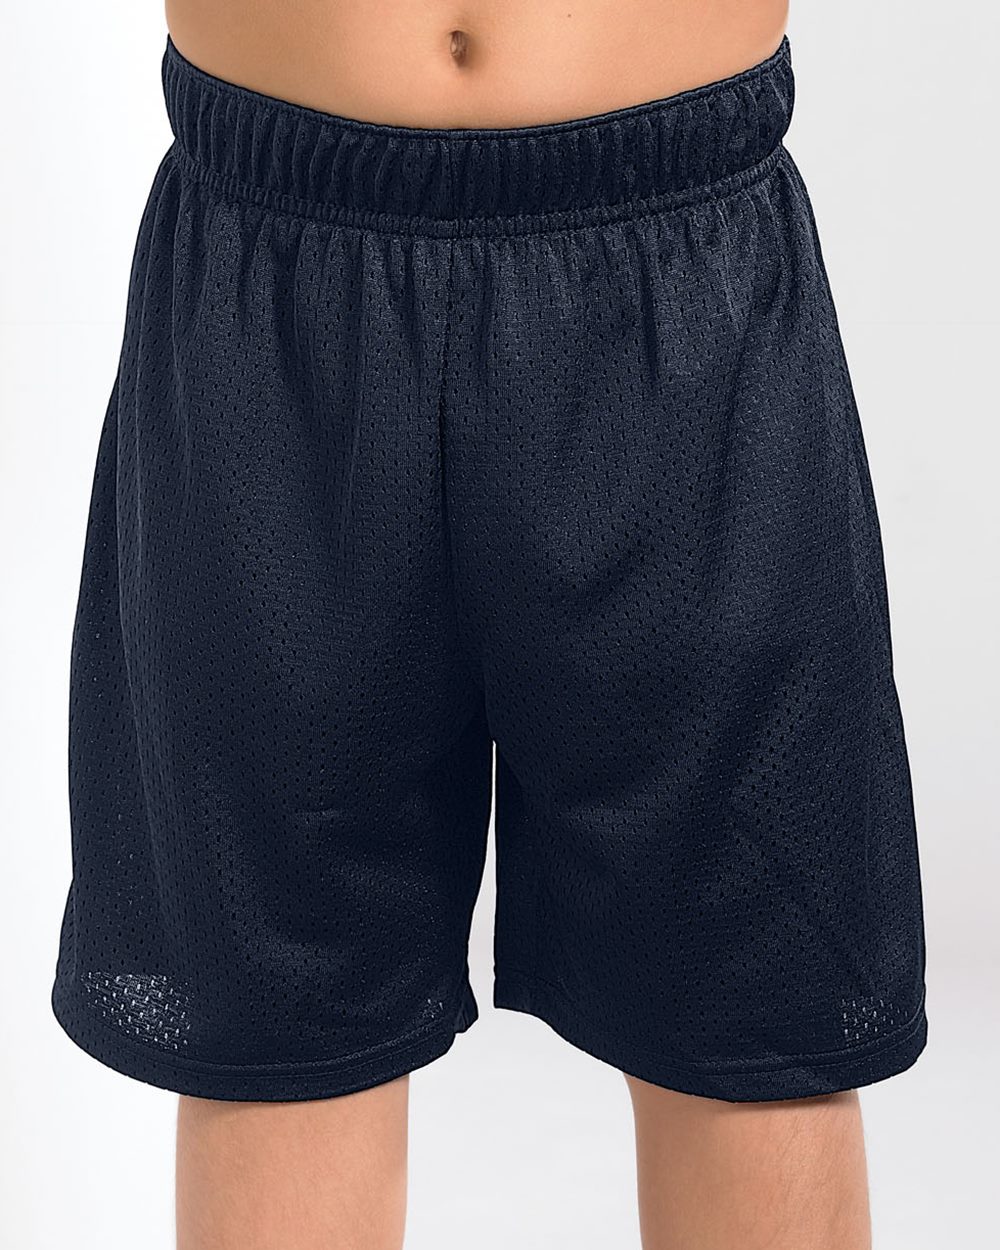 Sport-T Youth Moisture Wicking Mesh Shorts - TS140B - Wescan Embroidery ...